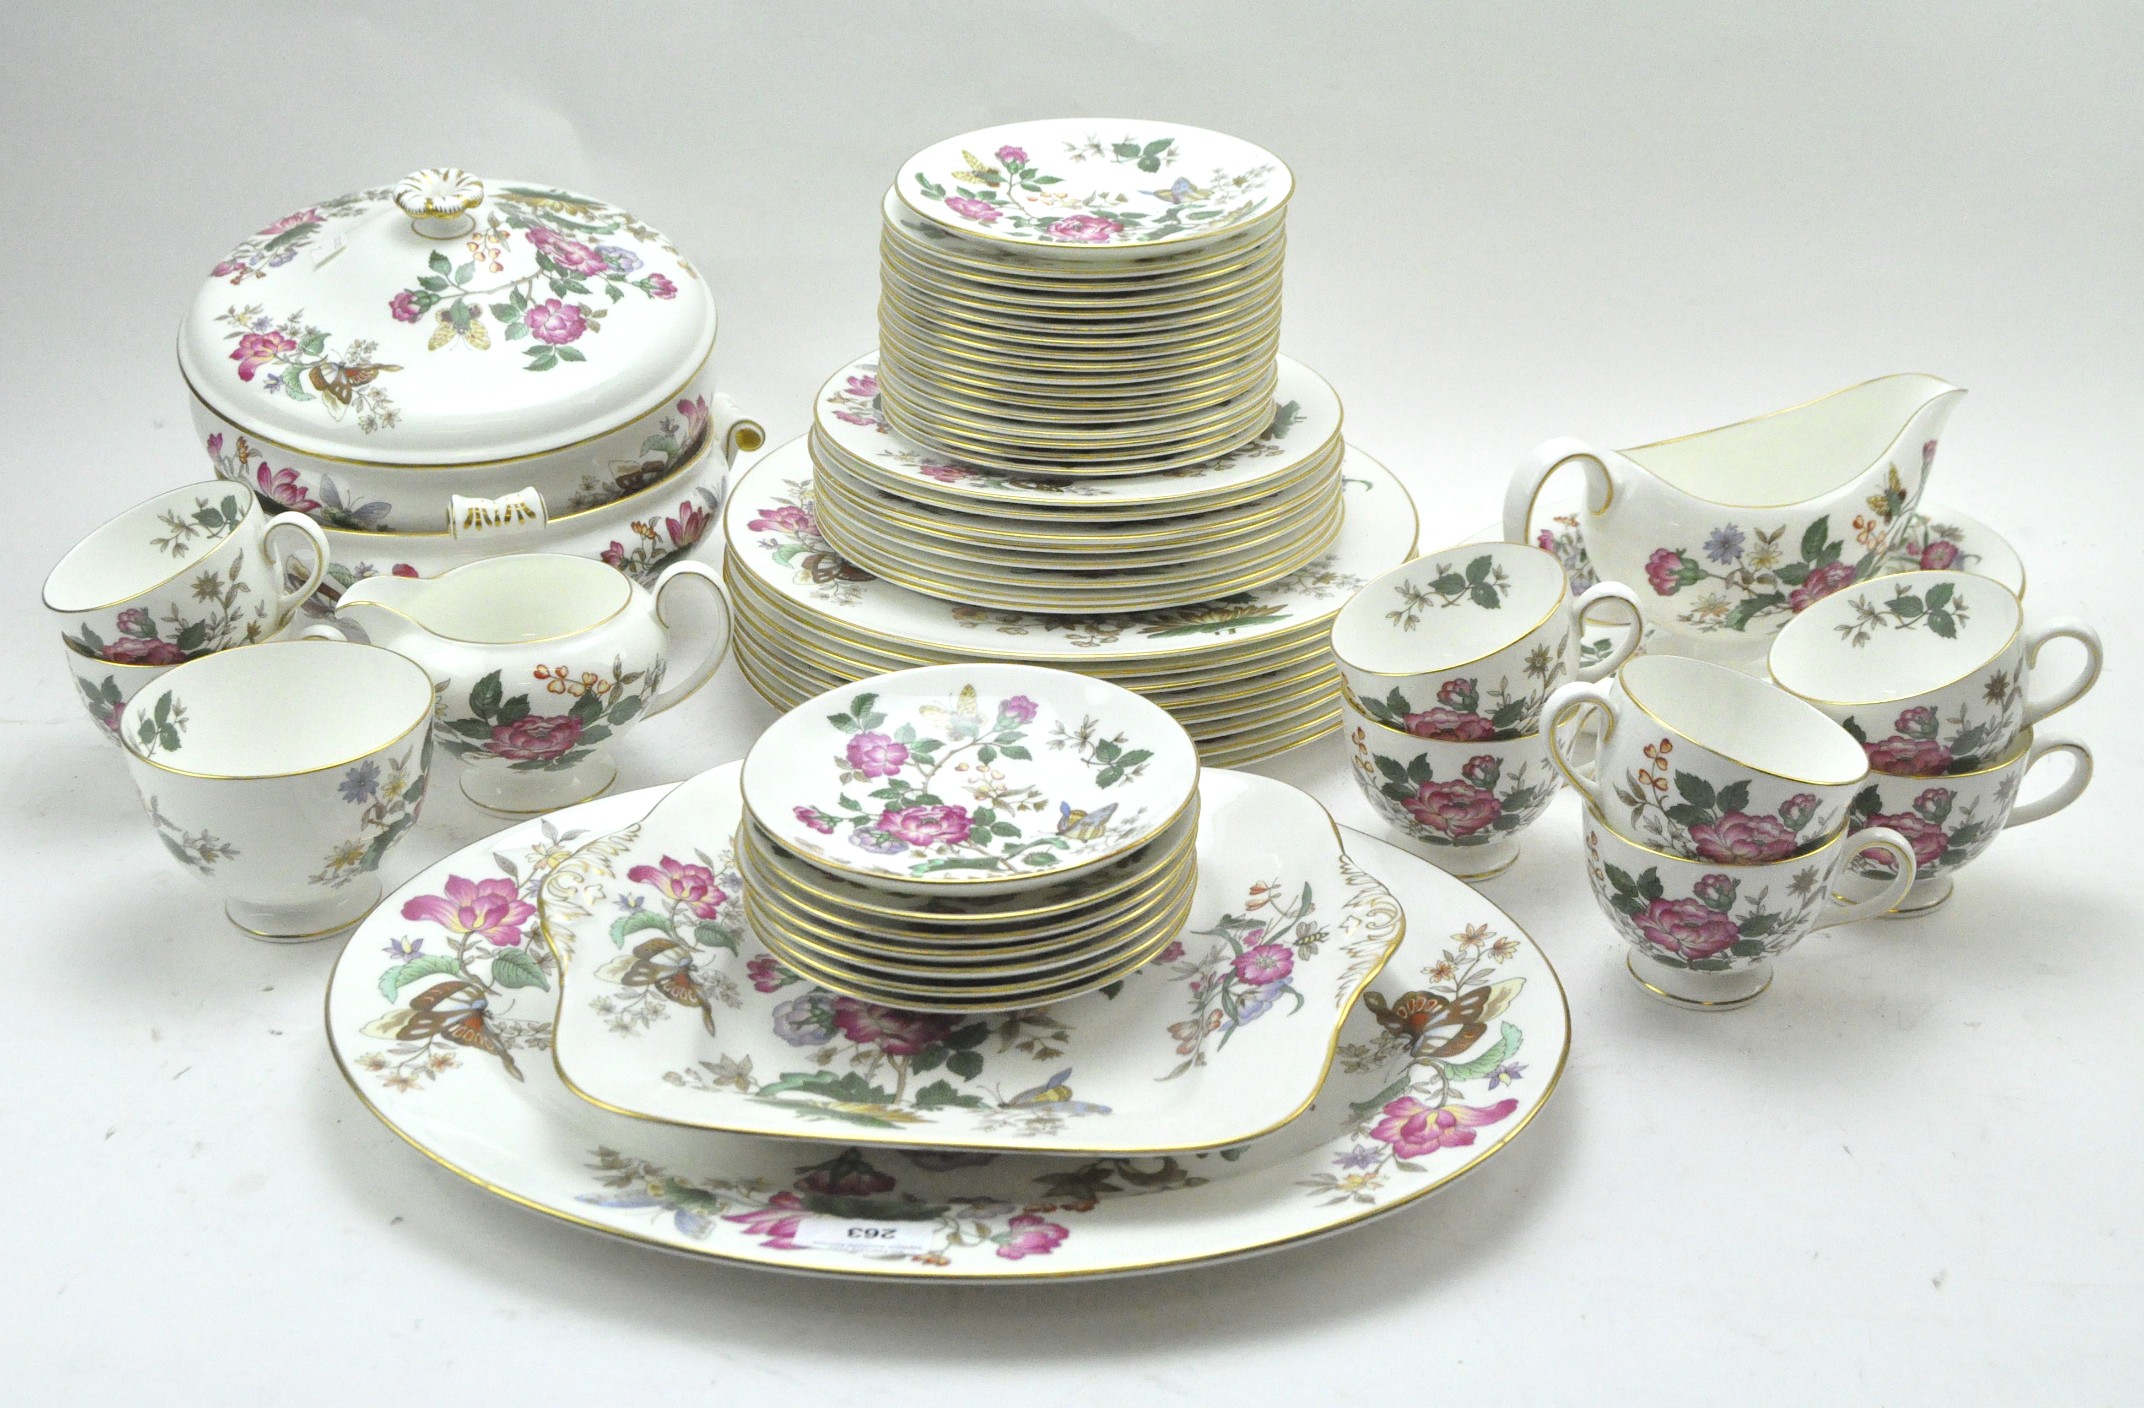 An extensive Wedgwood part tea and dinner service, in the 'Charnwood' pattern, including plates,